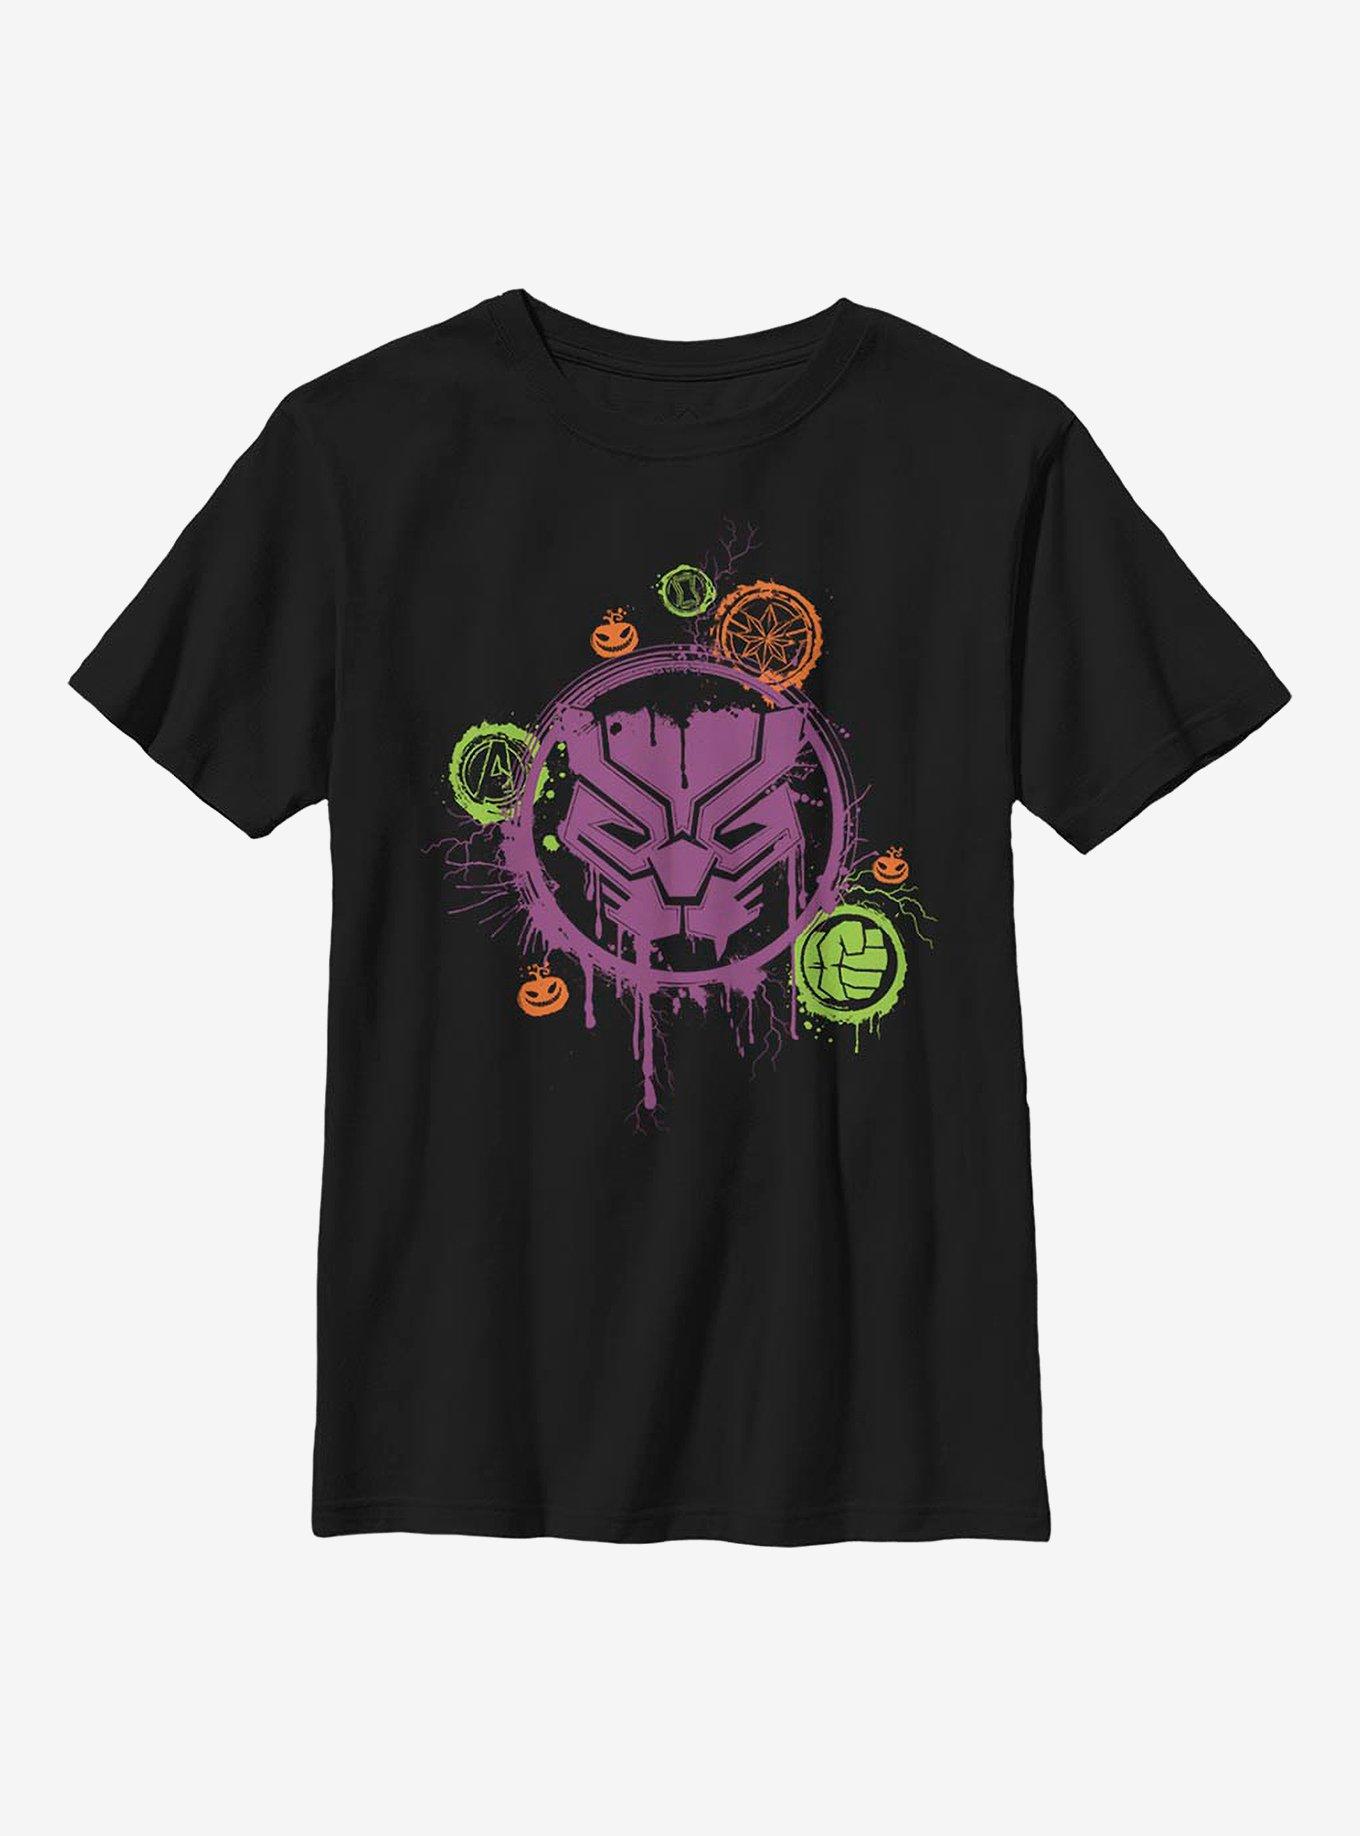 Marvel Avengers Panther Stencil Youth T-Shirt, BLACK, hi-res